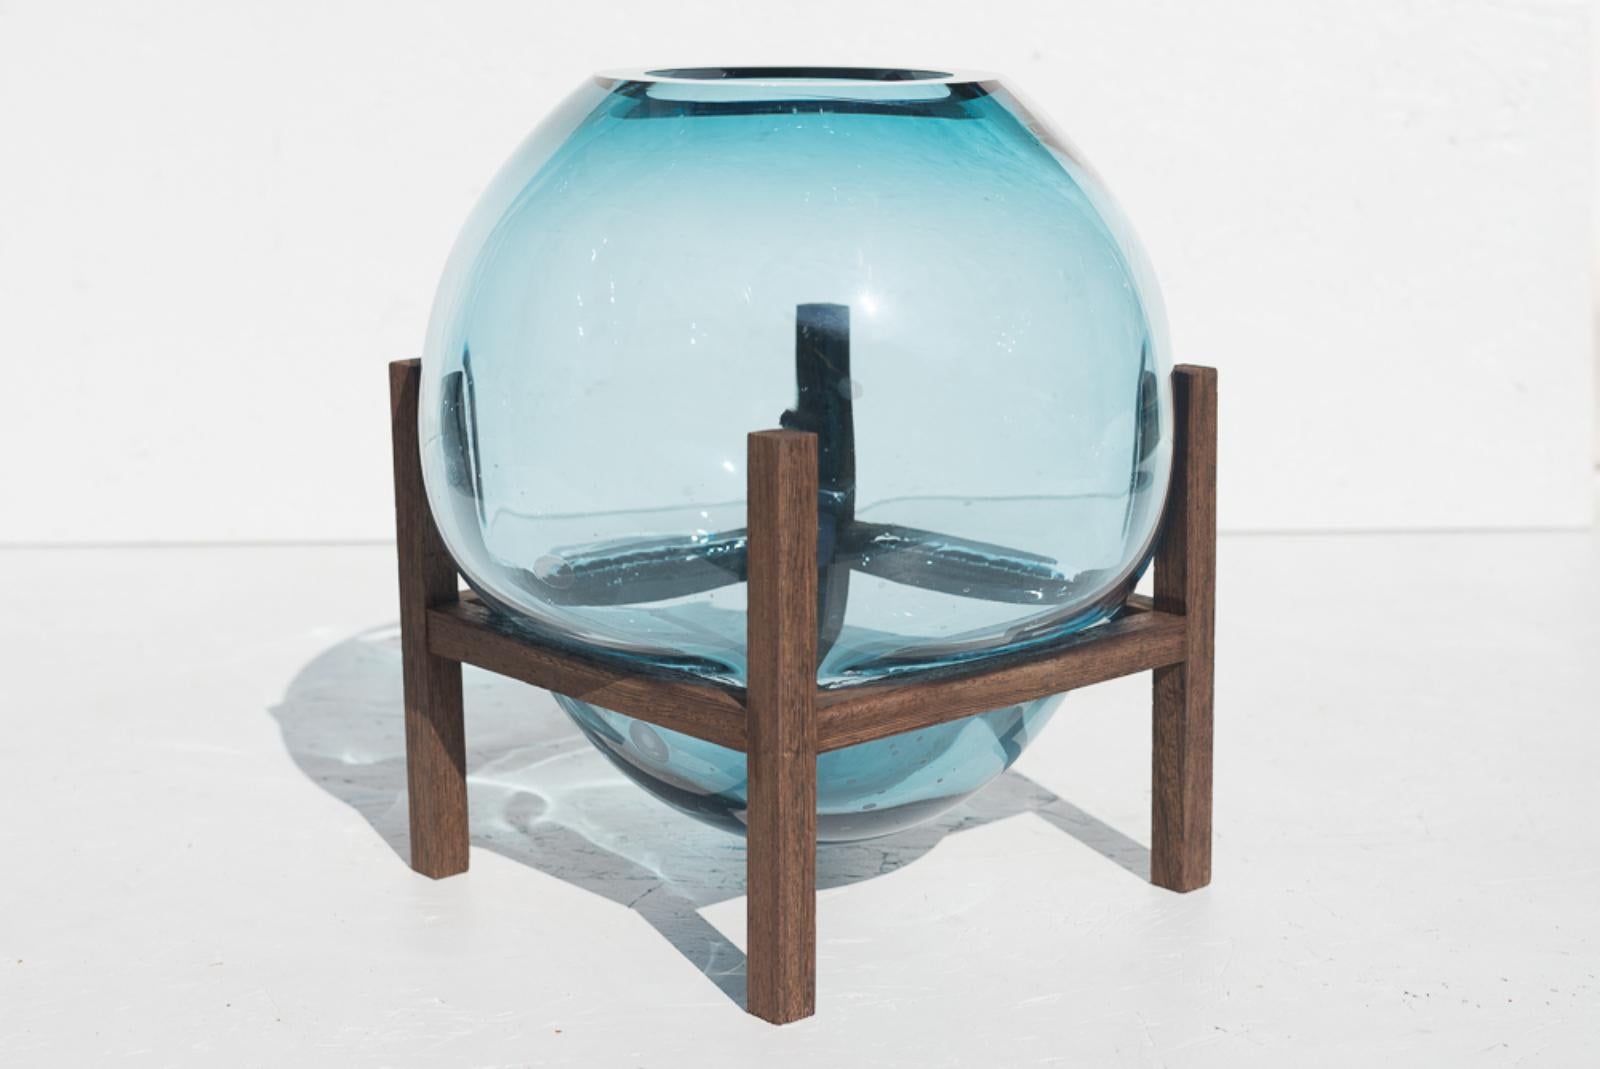 Round square blue up & down vase by Studio Thier & van Daalen
Dimensions: W 30 x D 30 x H 35cm
Materials: Wood, glass

When blowing soap bubbles in the air Iris & Ruben had the dream to capture these temporary beauties in a tendril frame. The